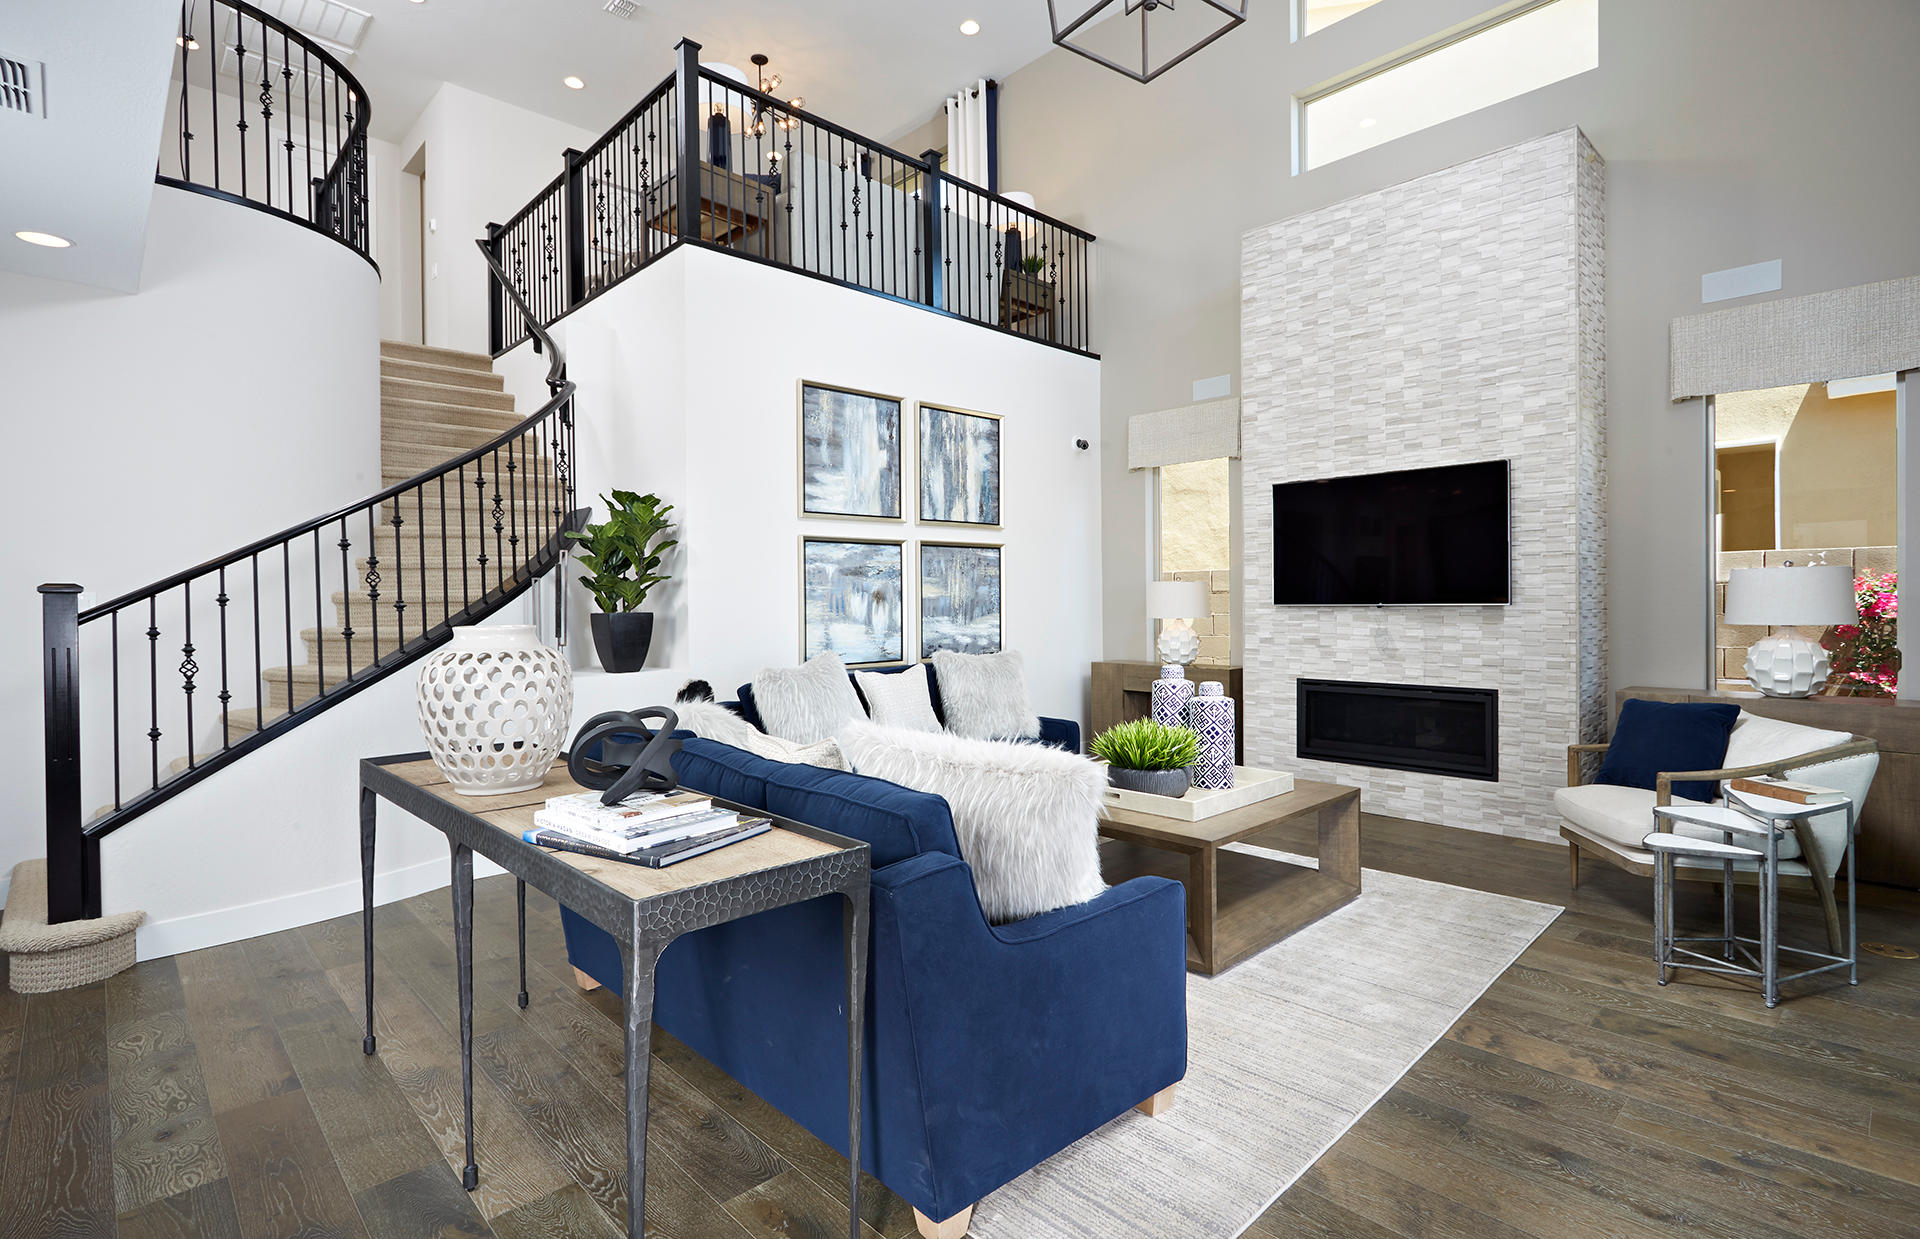 Sky Crossing by Pulte Homes Photo